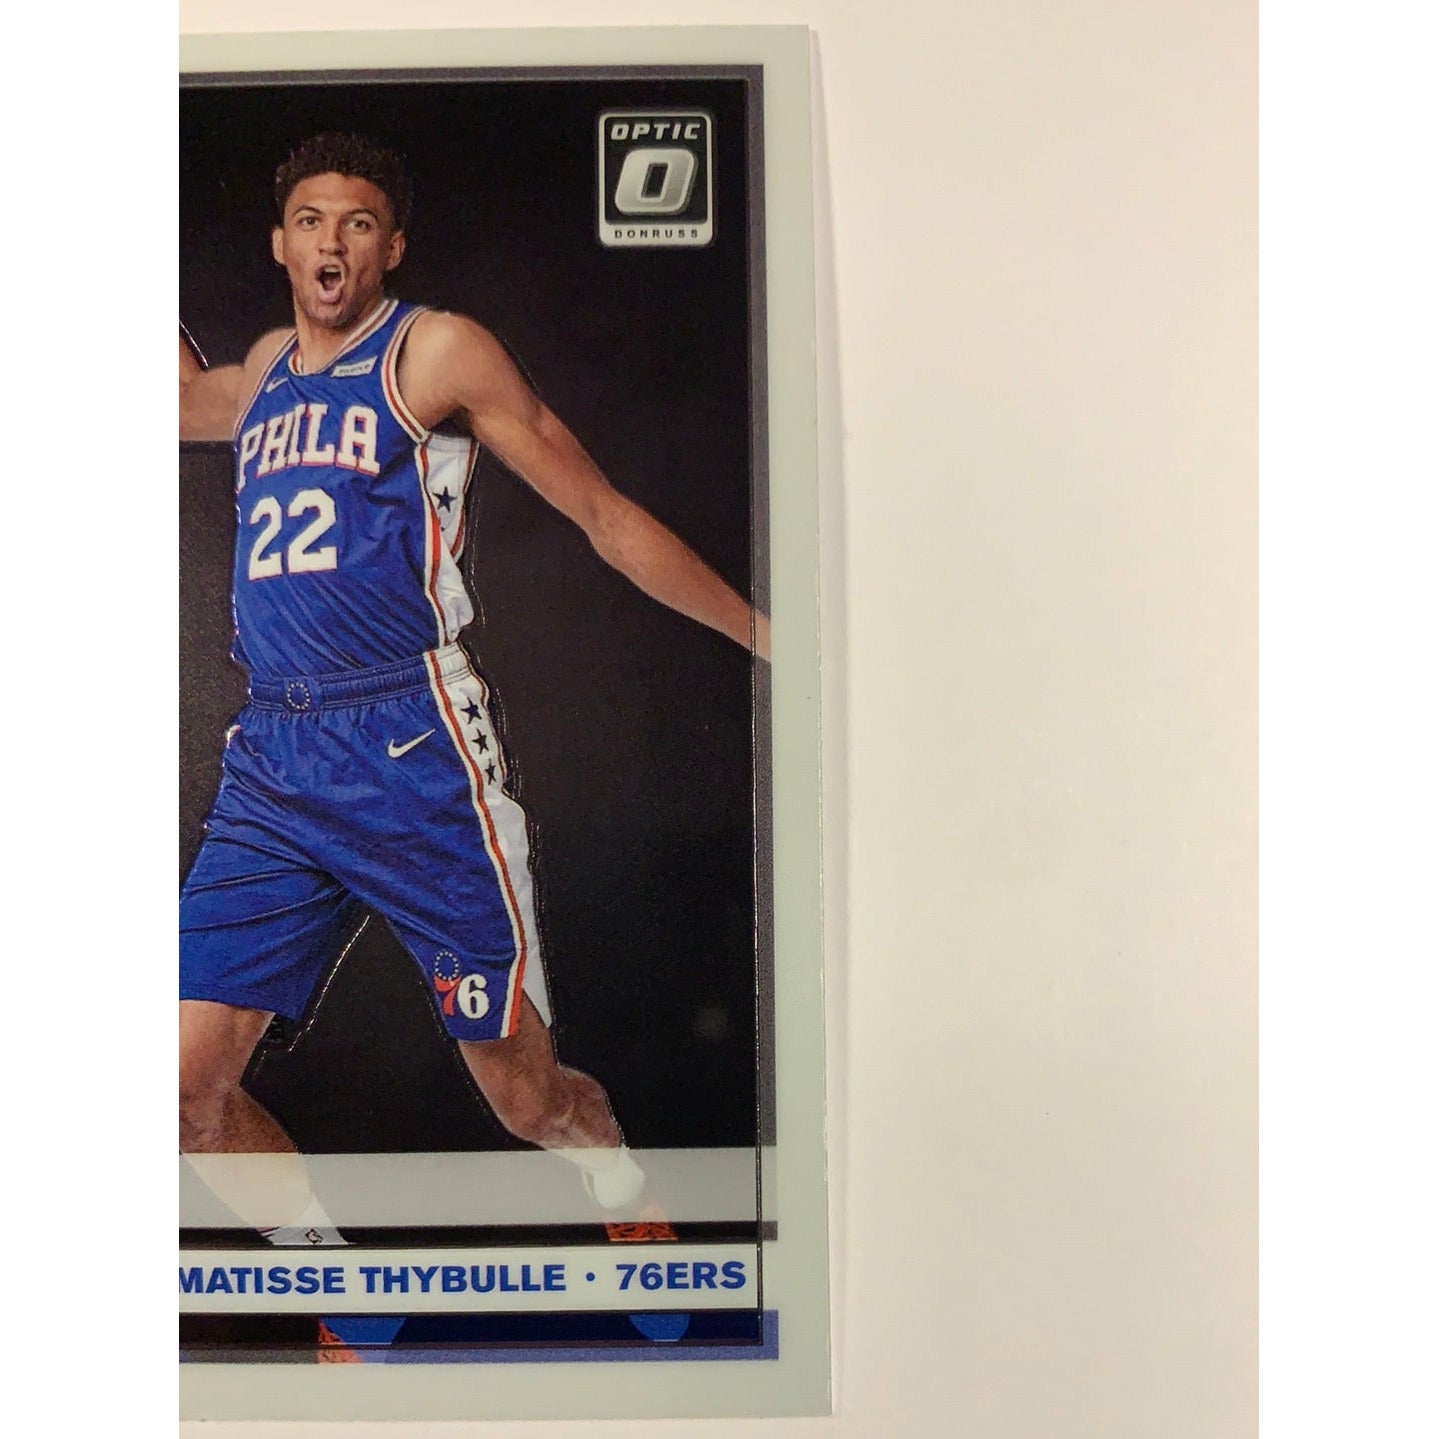  2019-20 Donruss Optic Matisse Thybulle Rated Rookie  Local Legends Cards & Collectibles